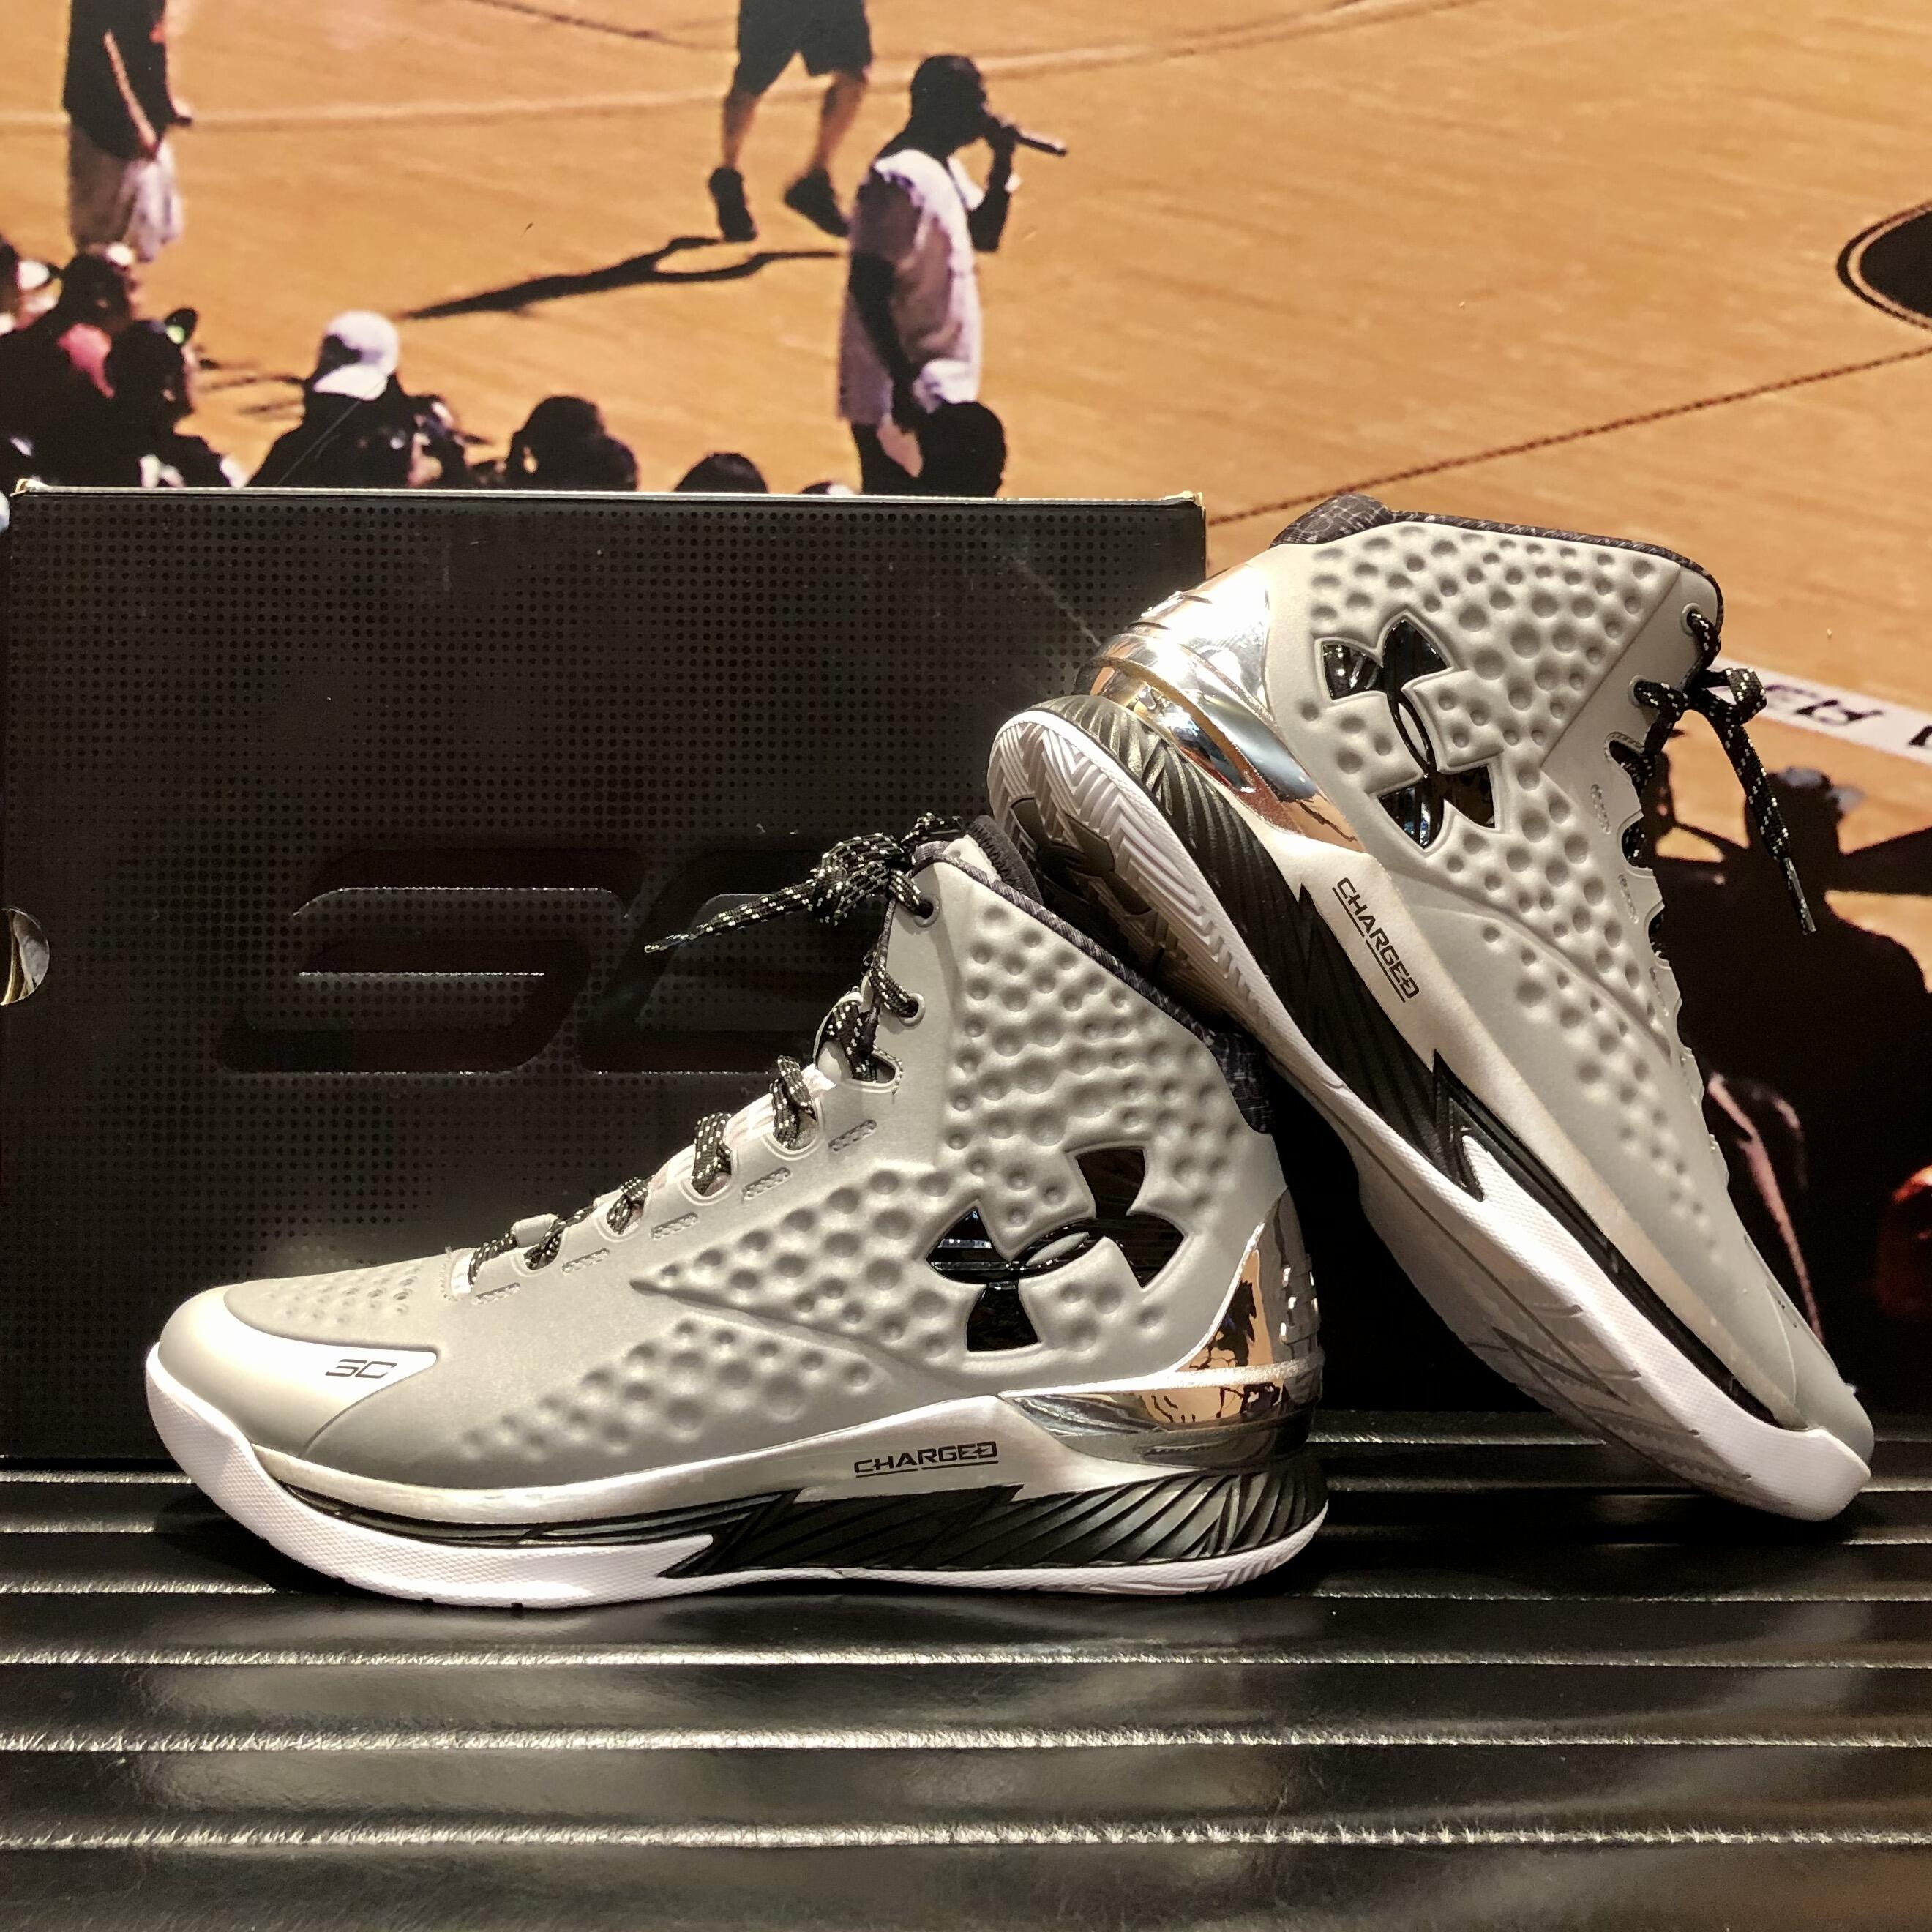 CURRY1 REFLECT | UNDER ARMOUR BRAND HOUSE 心斎橋 | SHOP BLOG